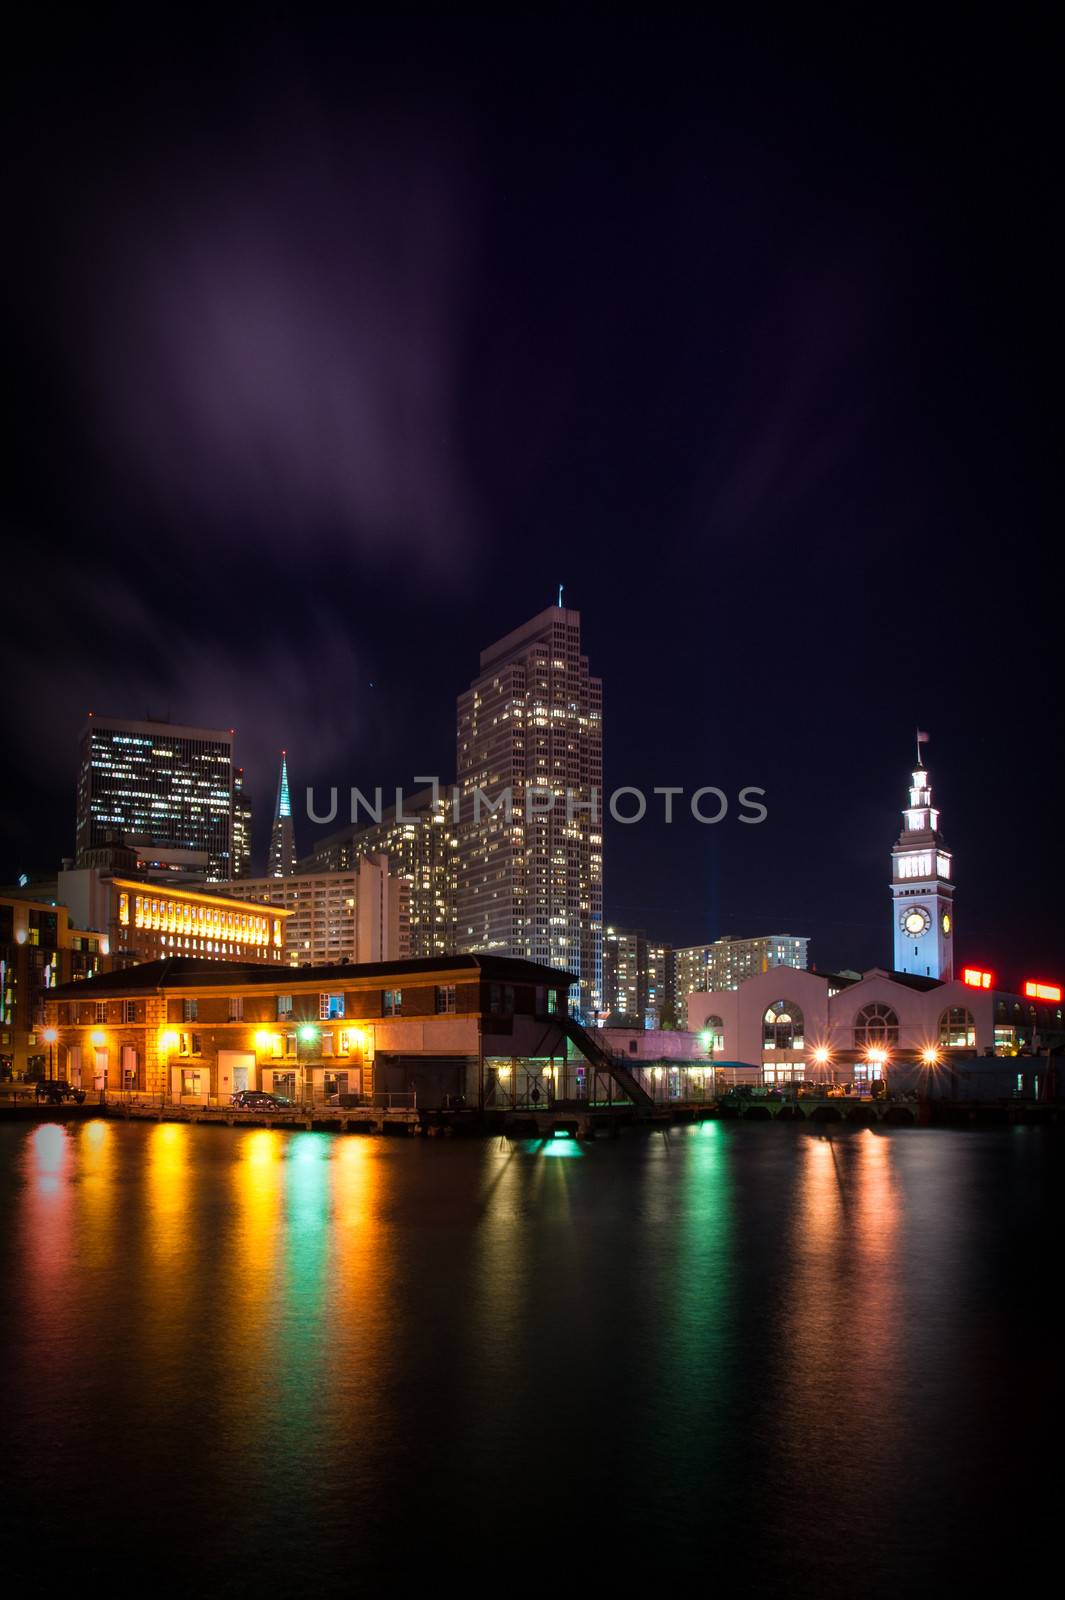 Clock tower of Ferry Building lit up at night, The Embarcadero, San Francisco, California, USA